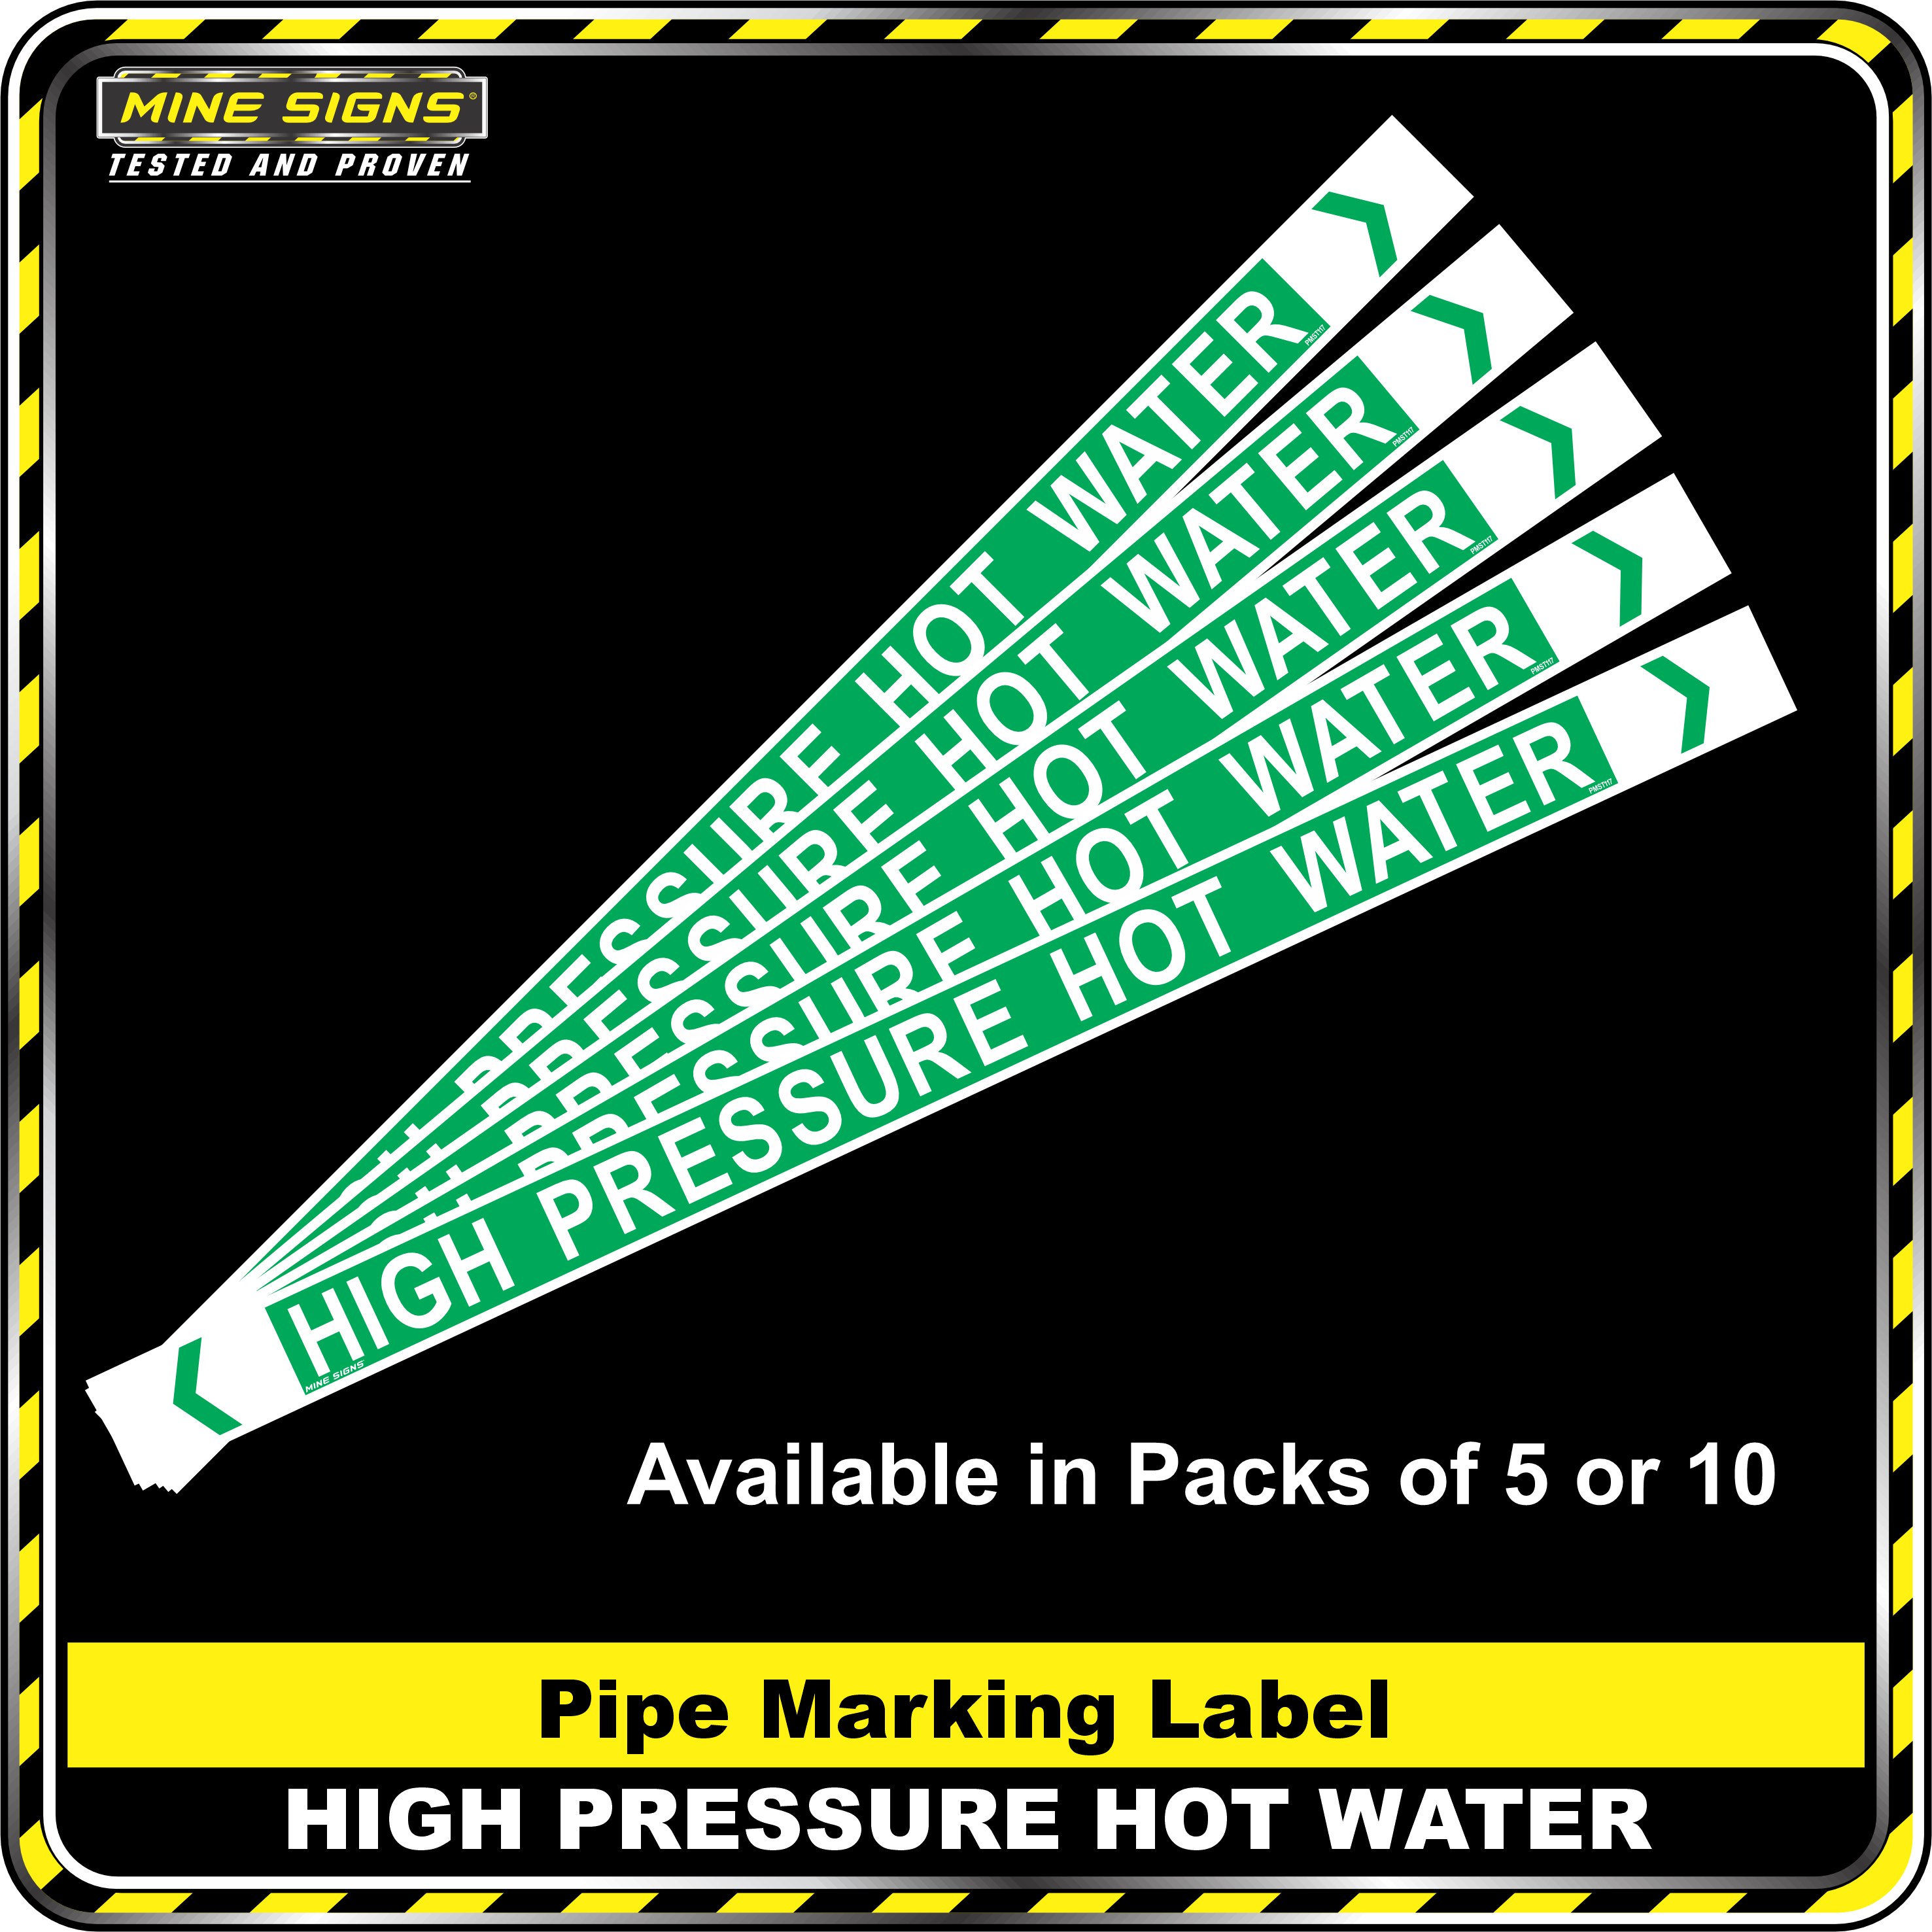 Pipe Marking Label - High Pressure Hot Water MS - Pipe Markers - High Pressure Hot Water